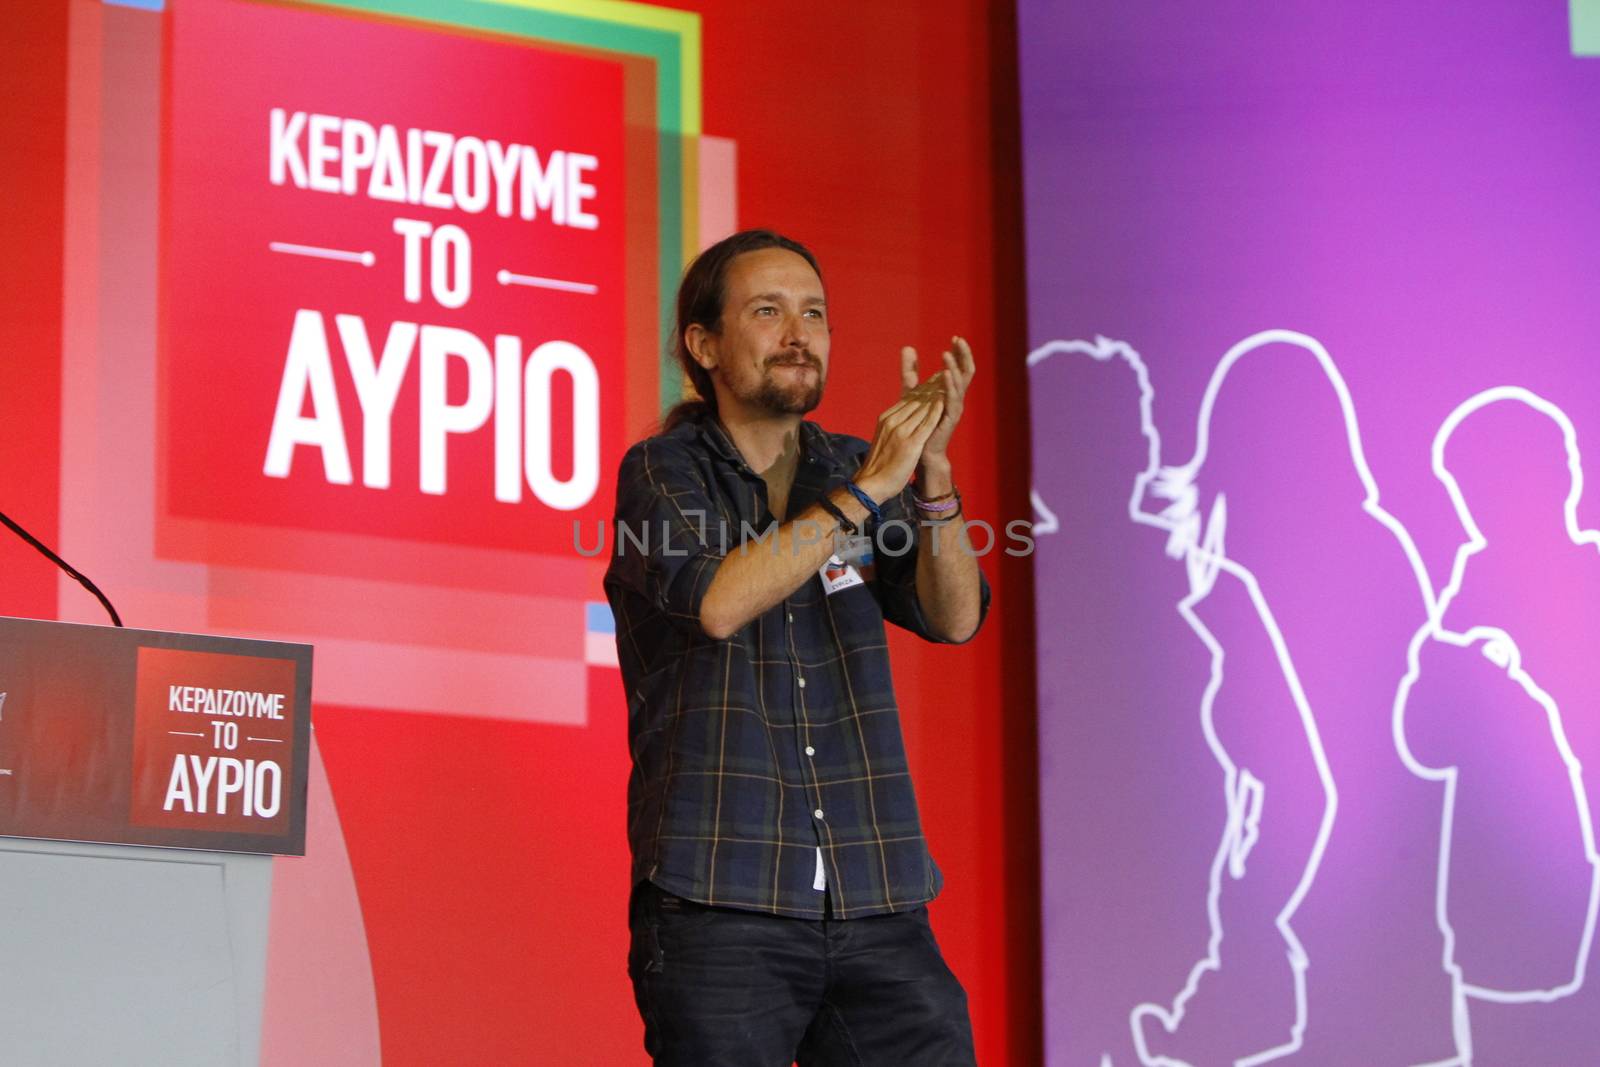 GREECE, Athens: Pablo Iglesias, the leader of the Spanish anti-austerity Podemos party, applauds the crowd of Syriza supporters during the party's final election rally at Syntagma Square, Athens on September 18, 2015 two days ahead of the Greek General Election